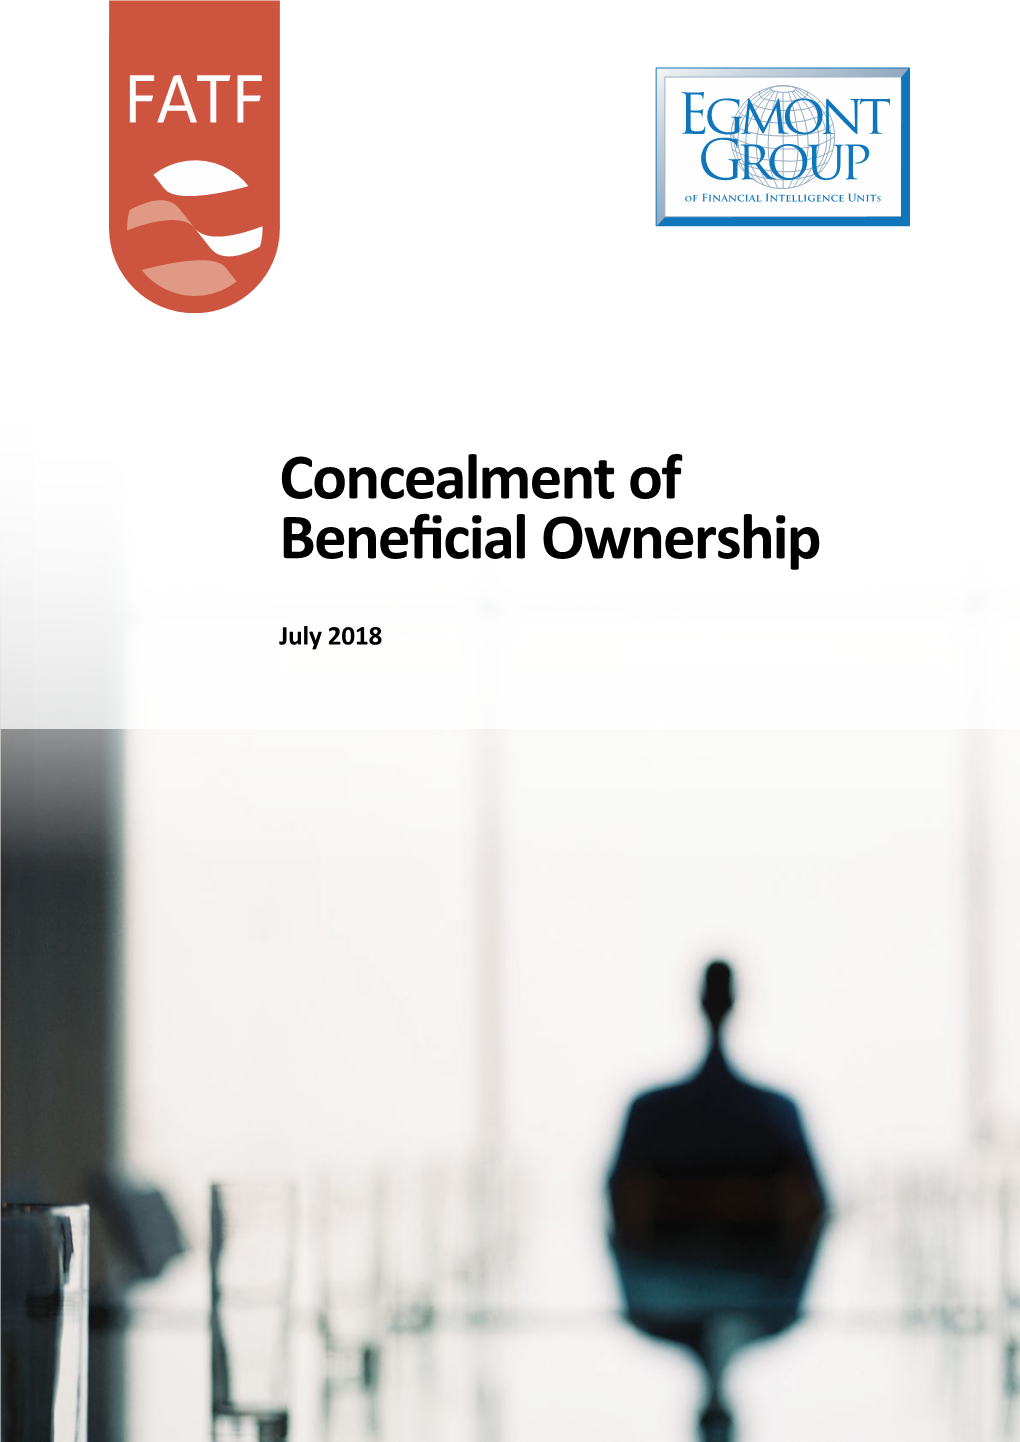 Egmont Group (2018). Concealment of Beneficial Ownership, FATF